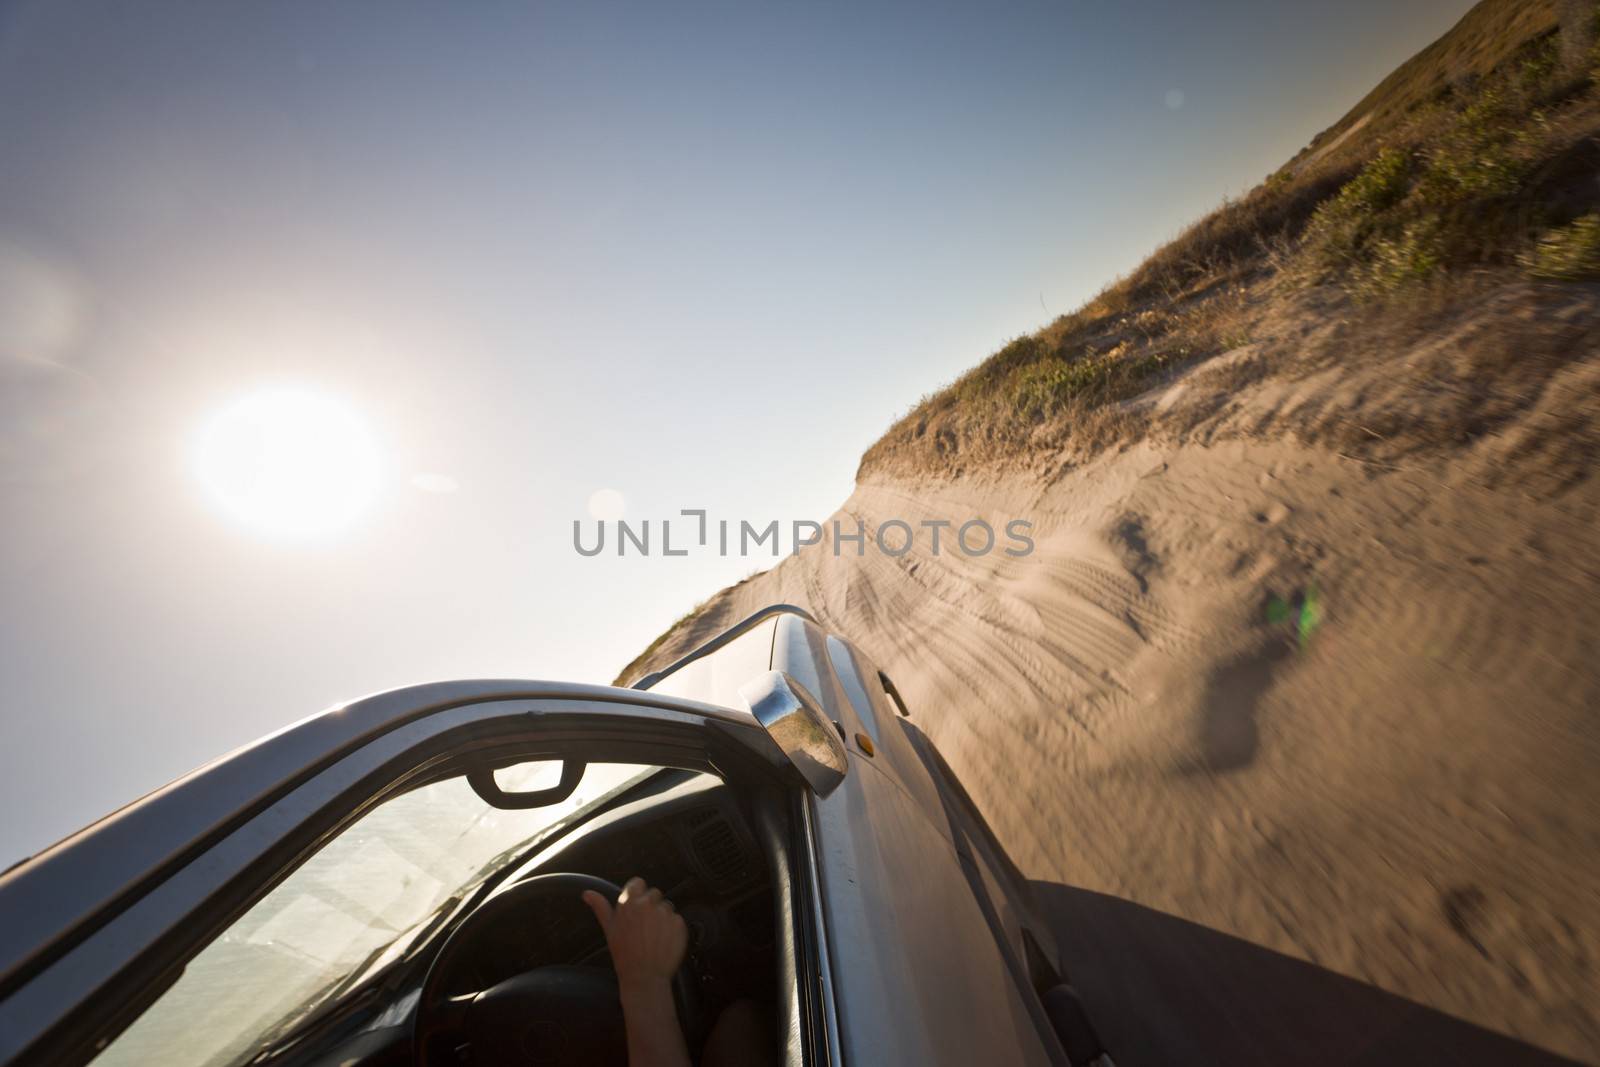 Car driving on a potholed dirt road under a searing sun across flat dry countryside